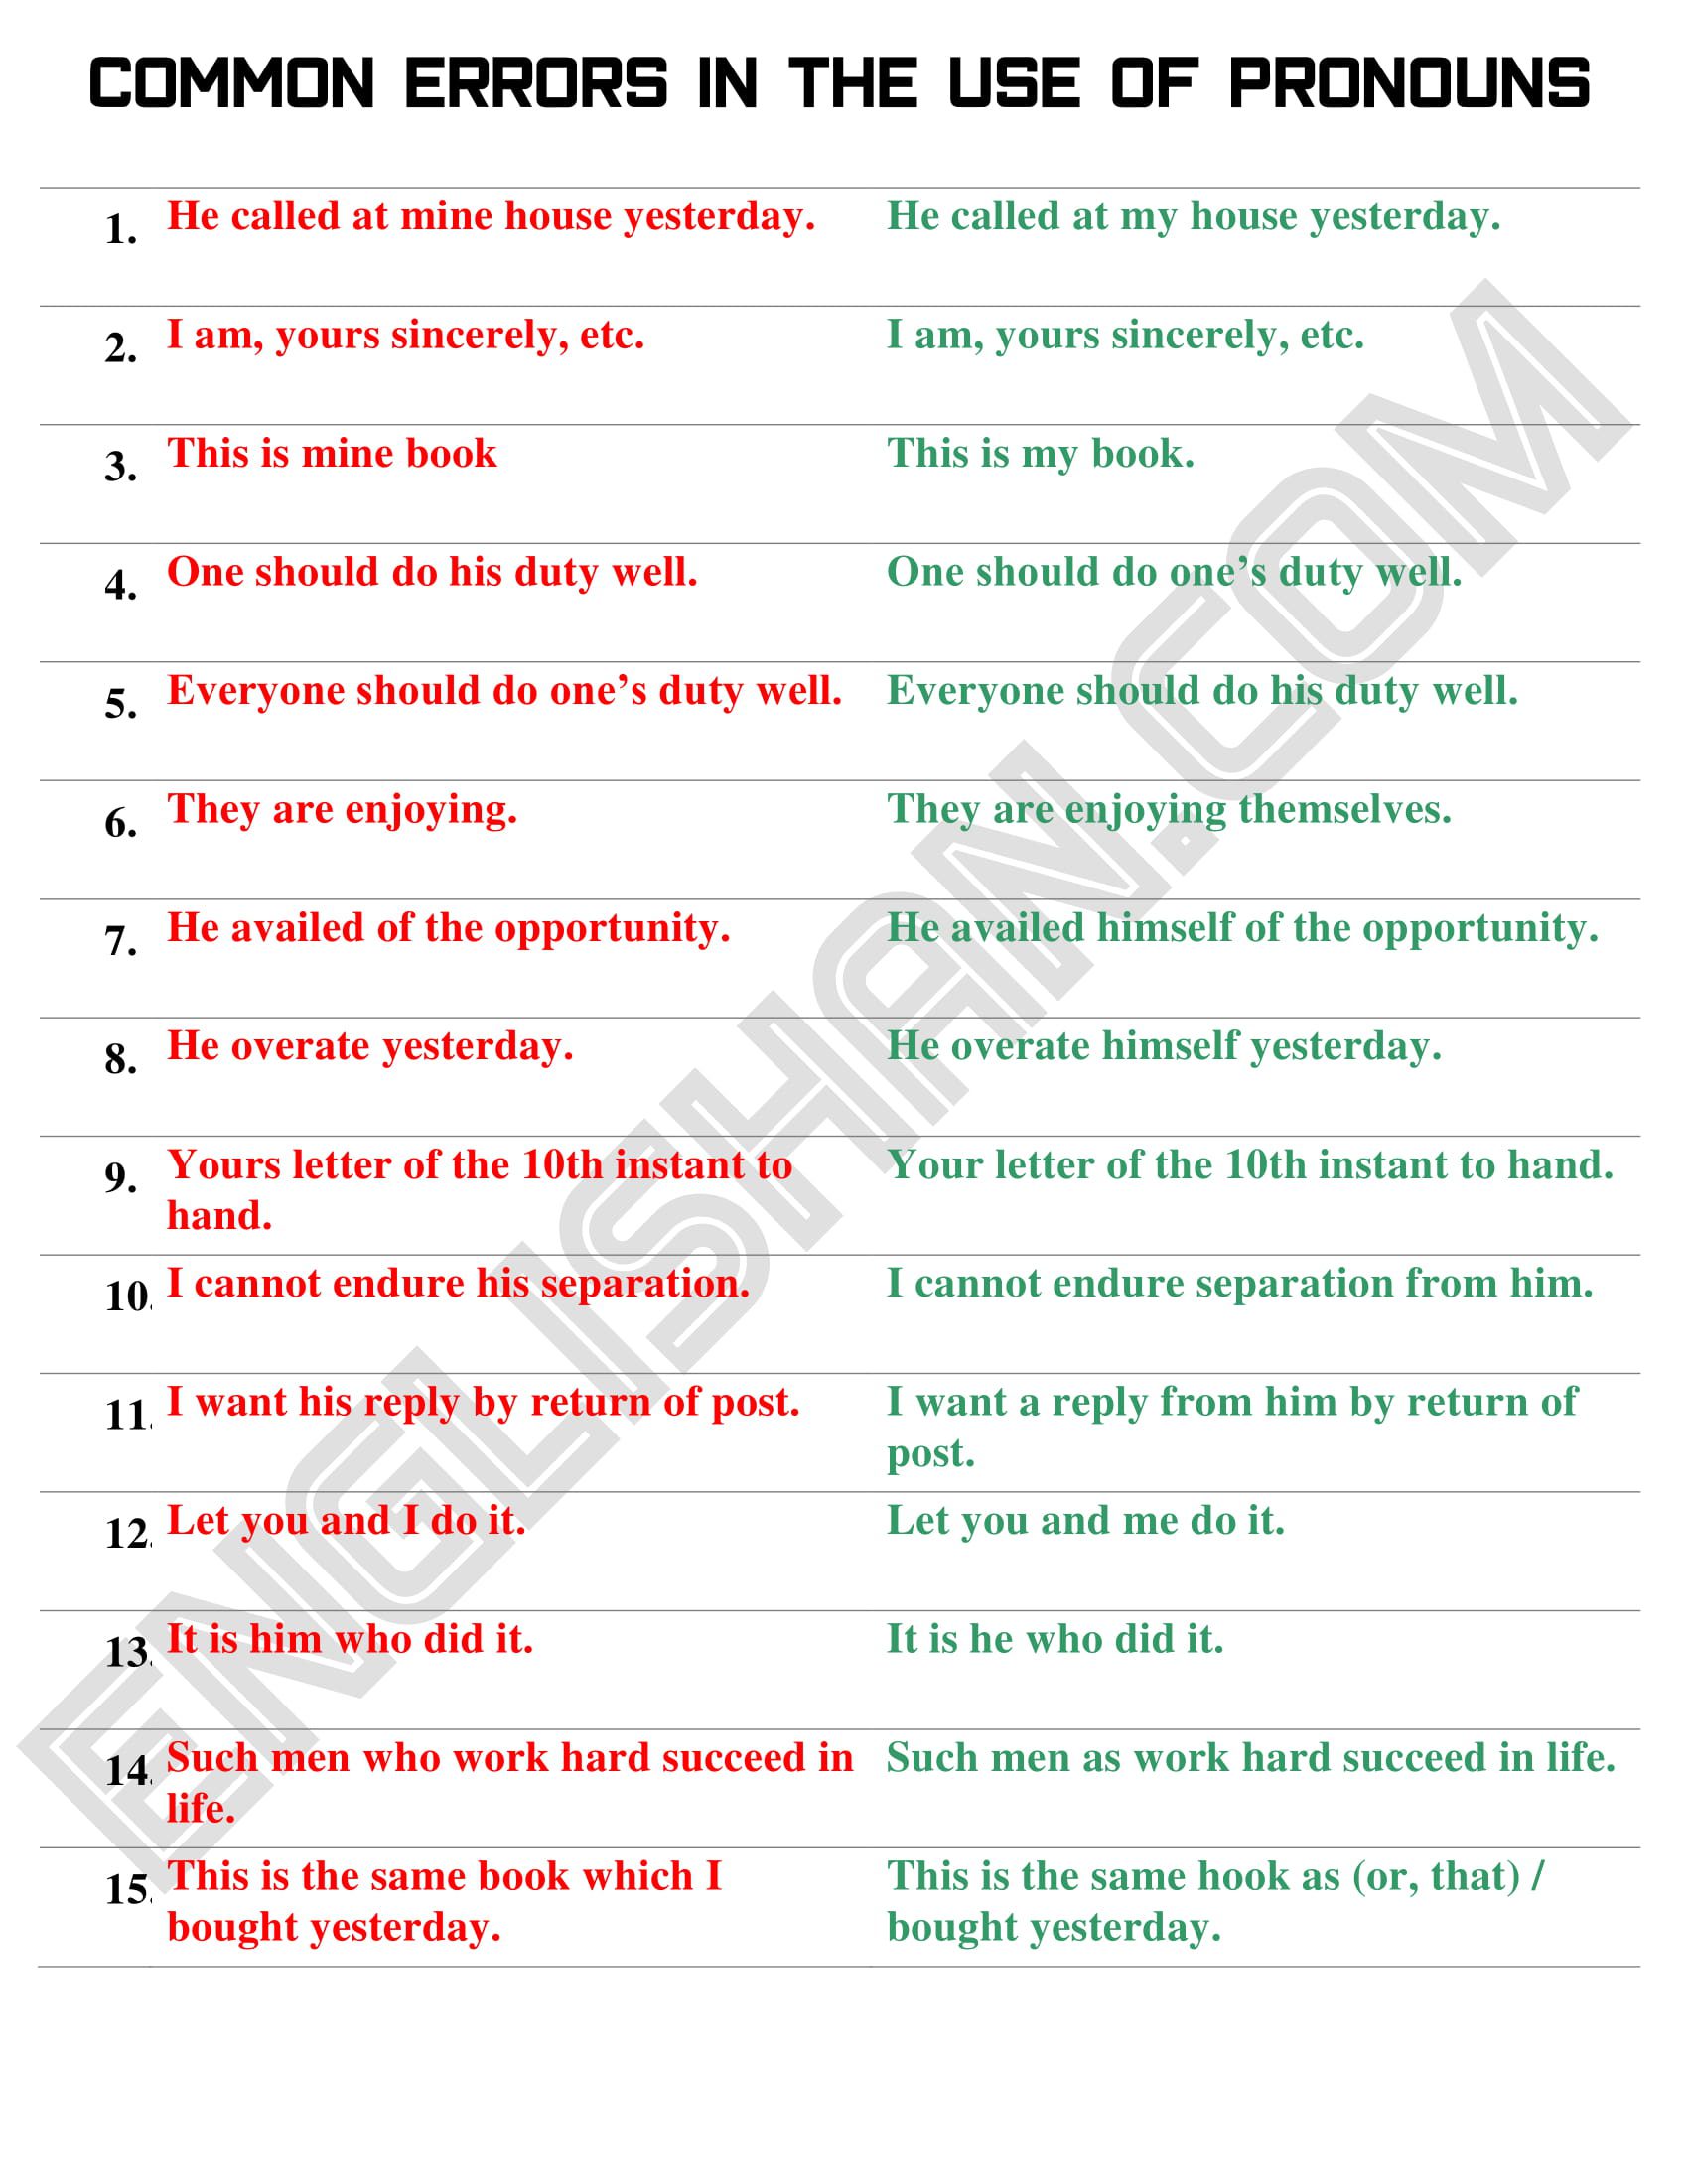 common-pronoun-errors-with-uses-and-examples-in-pdf